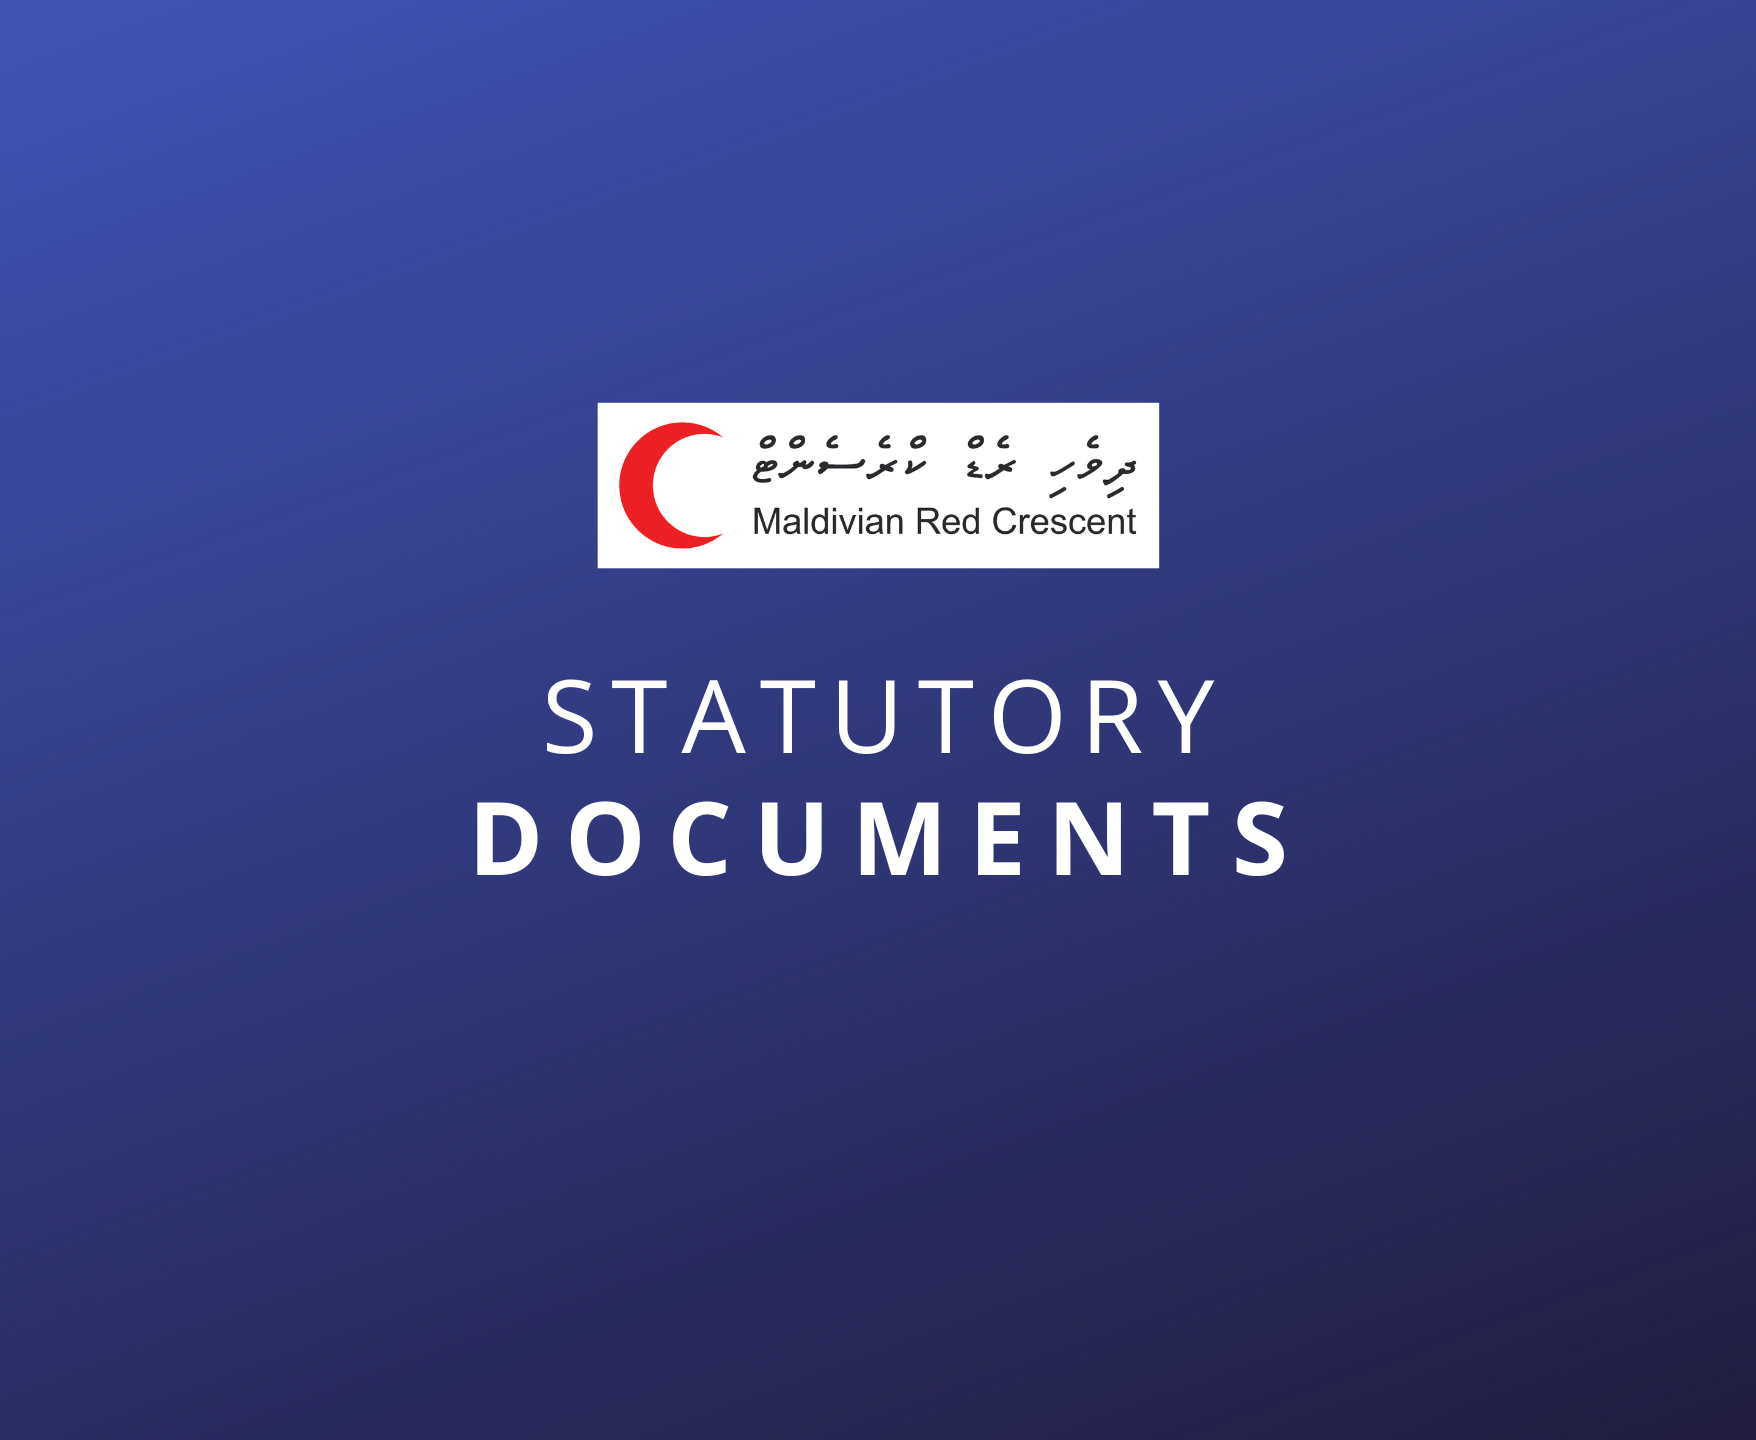 Image for resource collection Statutory Documents